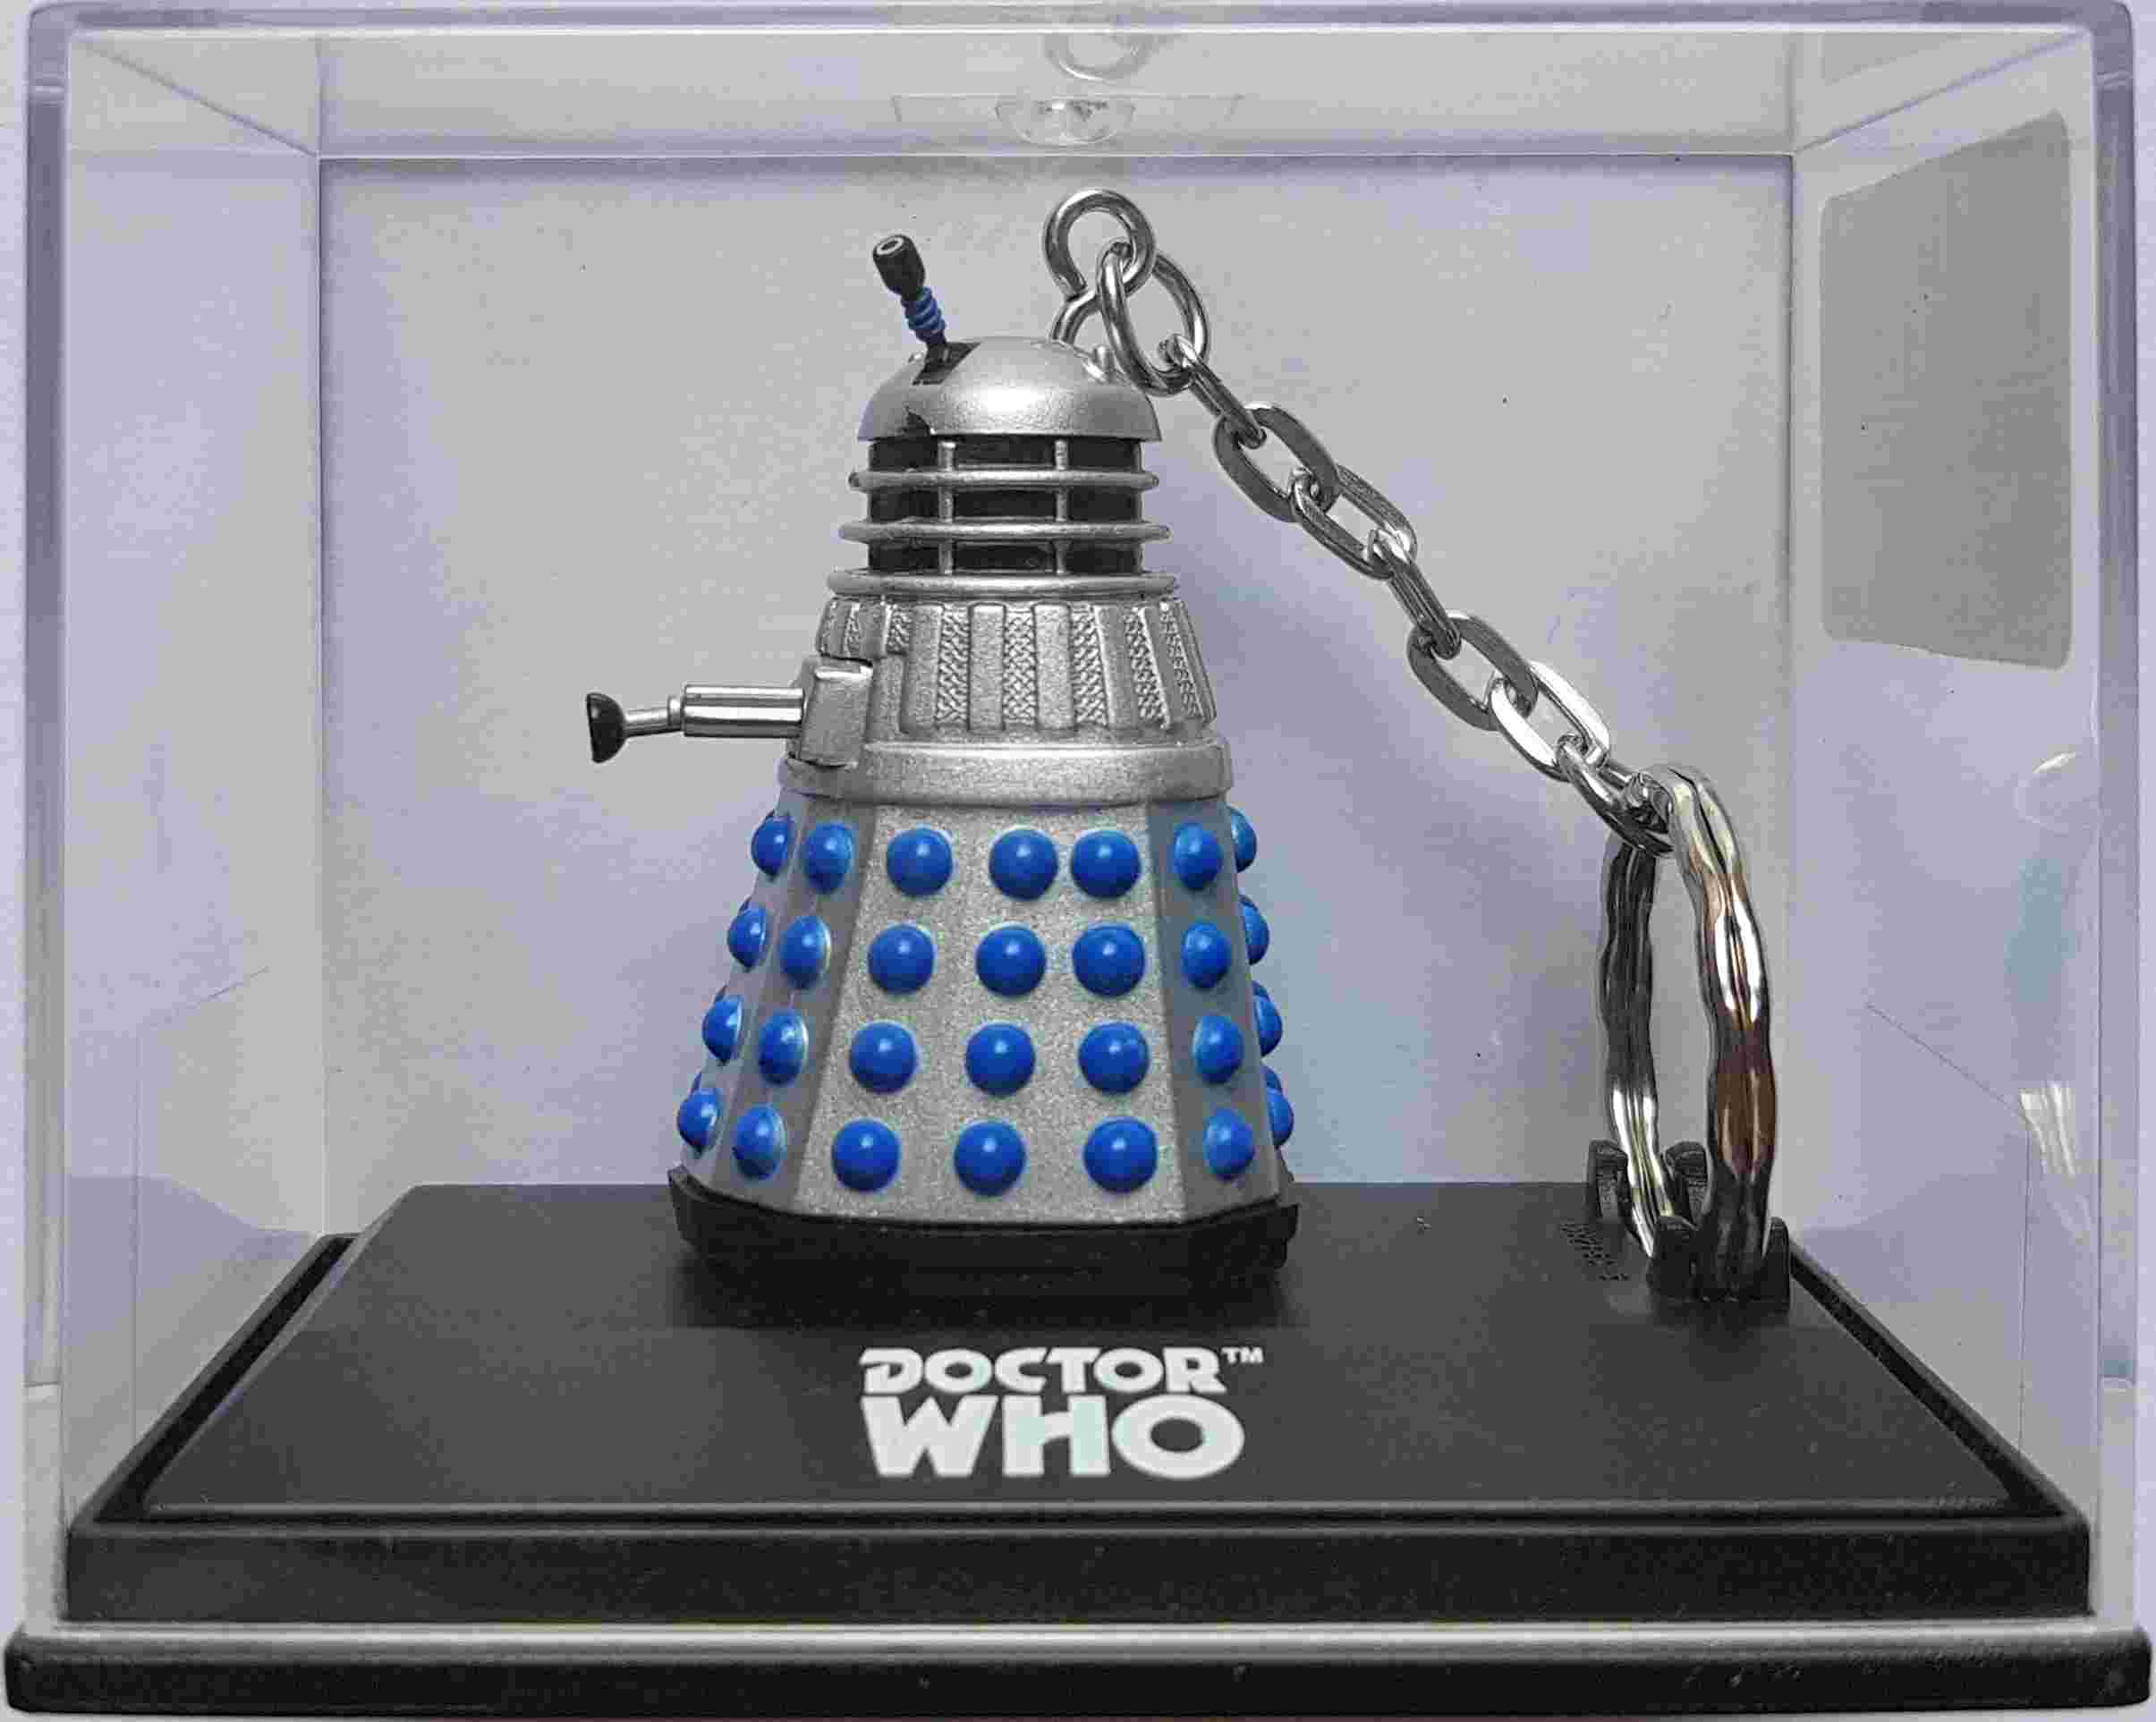 Picture of Models-Dalek Models - Dalek by artist  from the BBC records and Tapes library